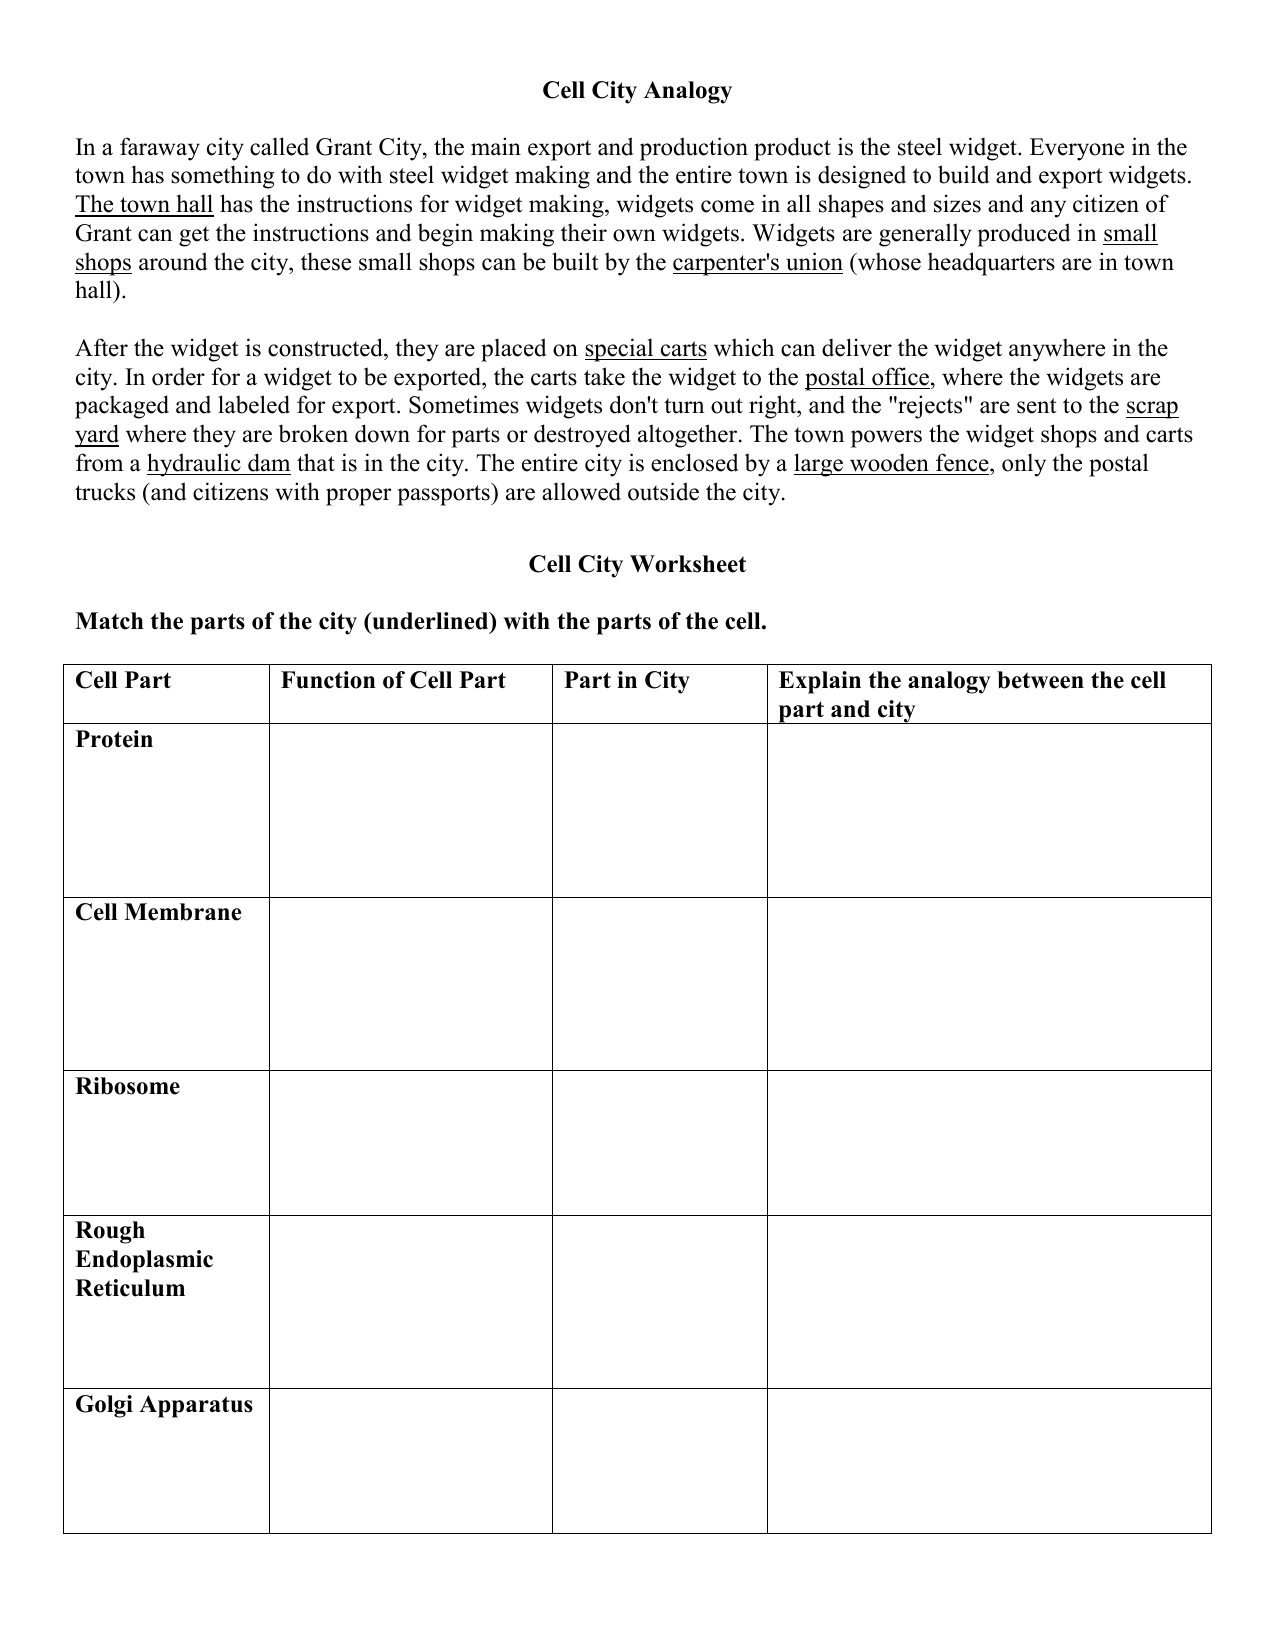 Cell Analogy Worksheet Pertaining To Cell City Analogy Worksheet